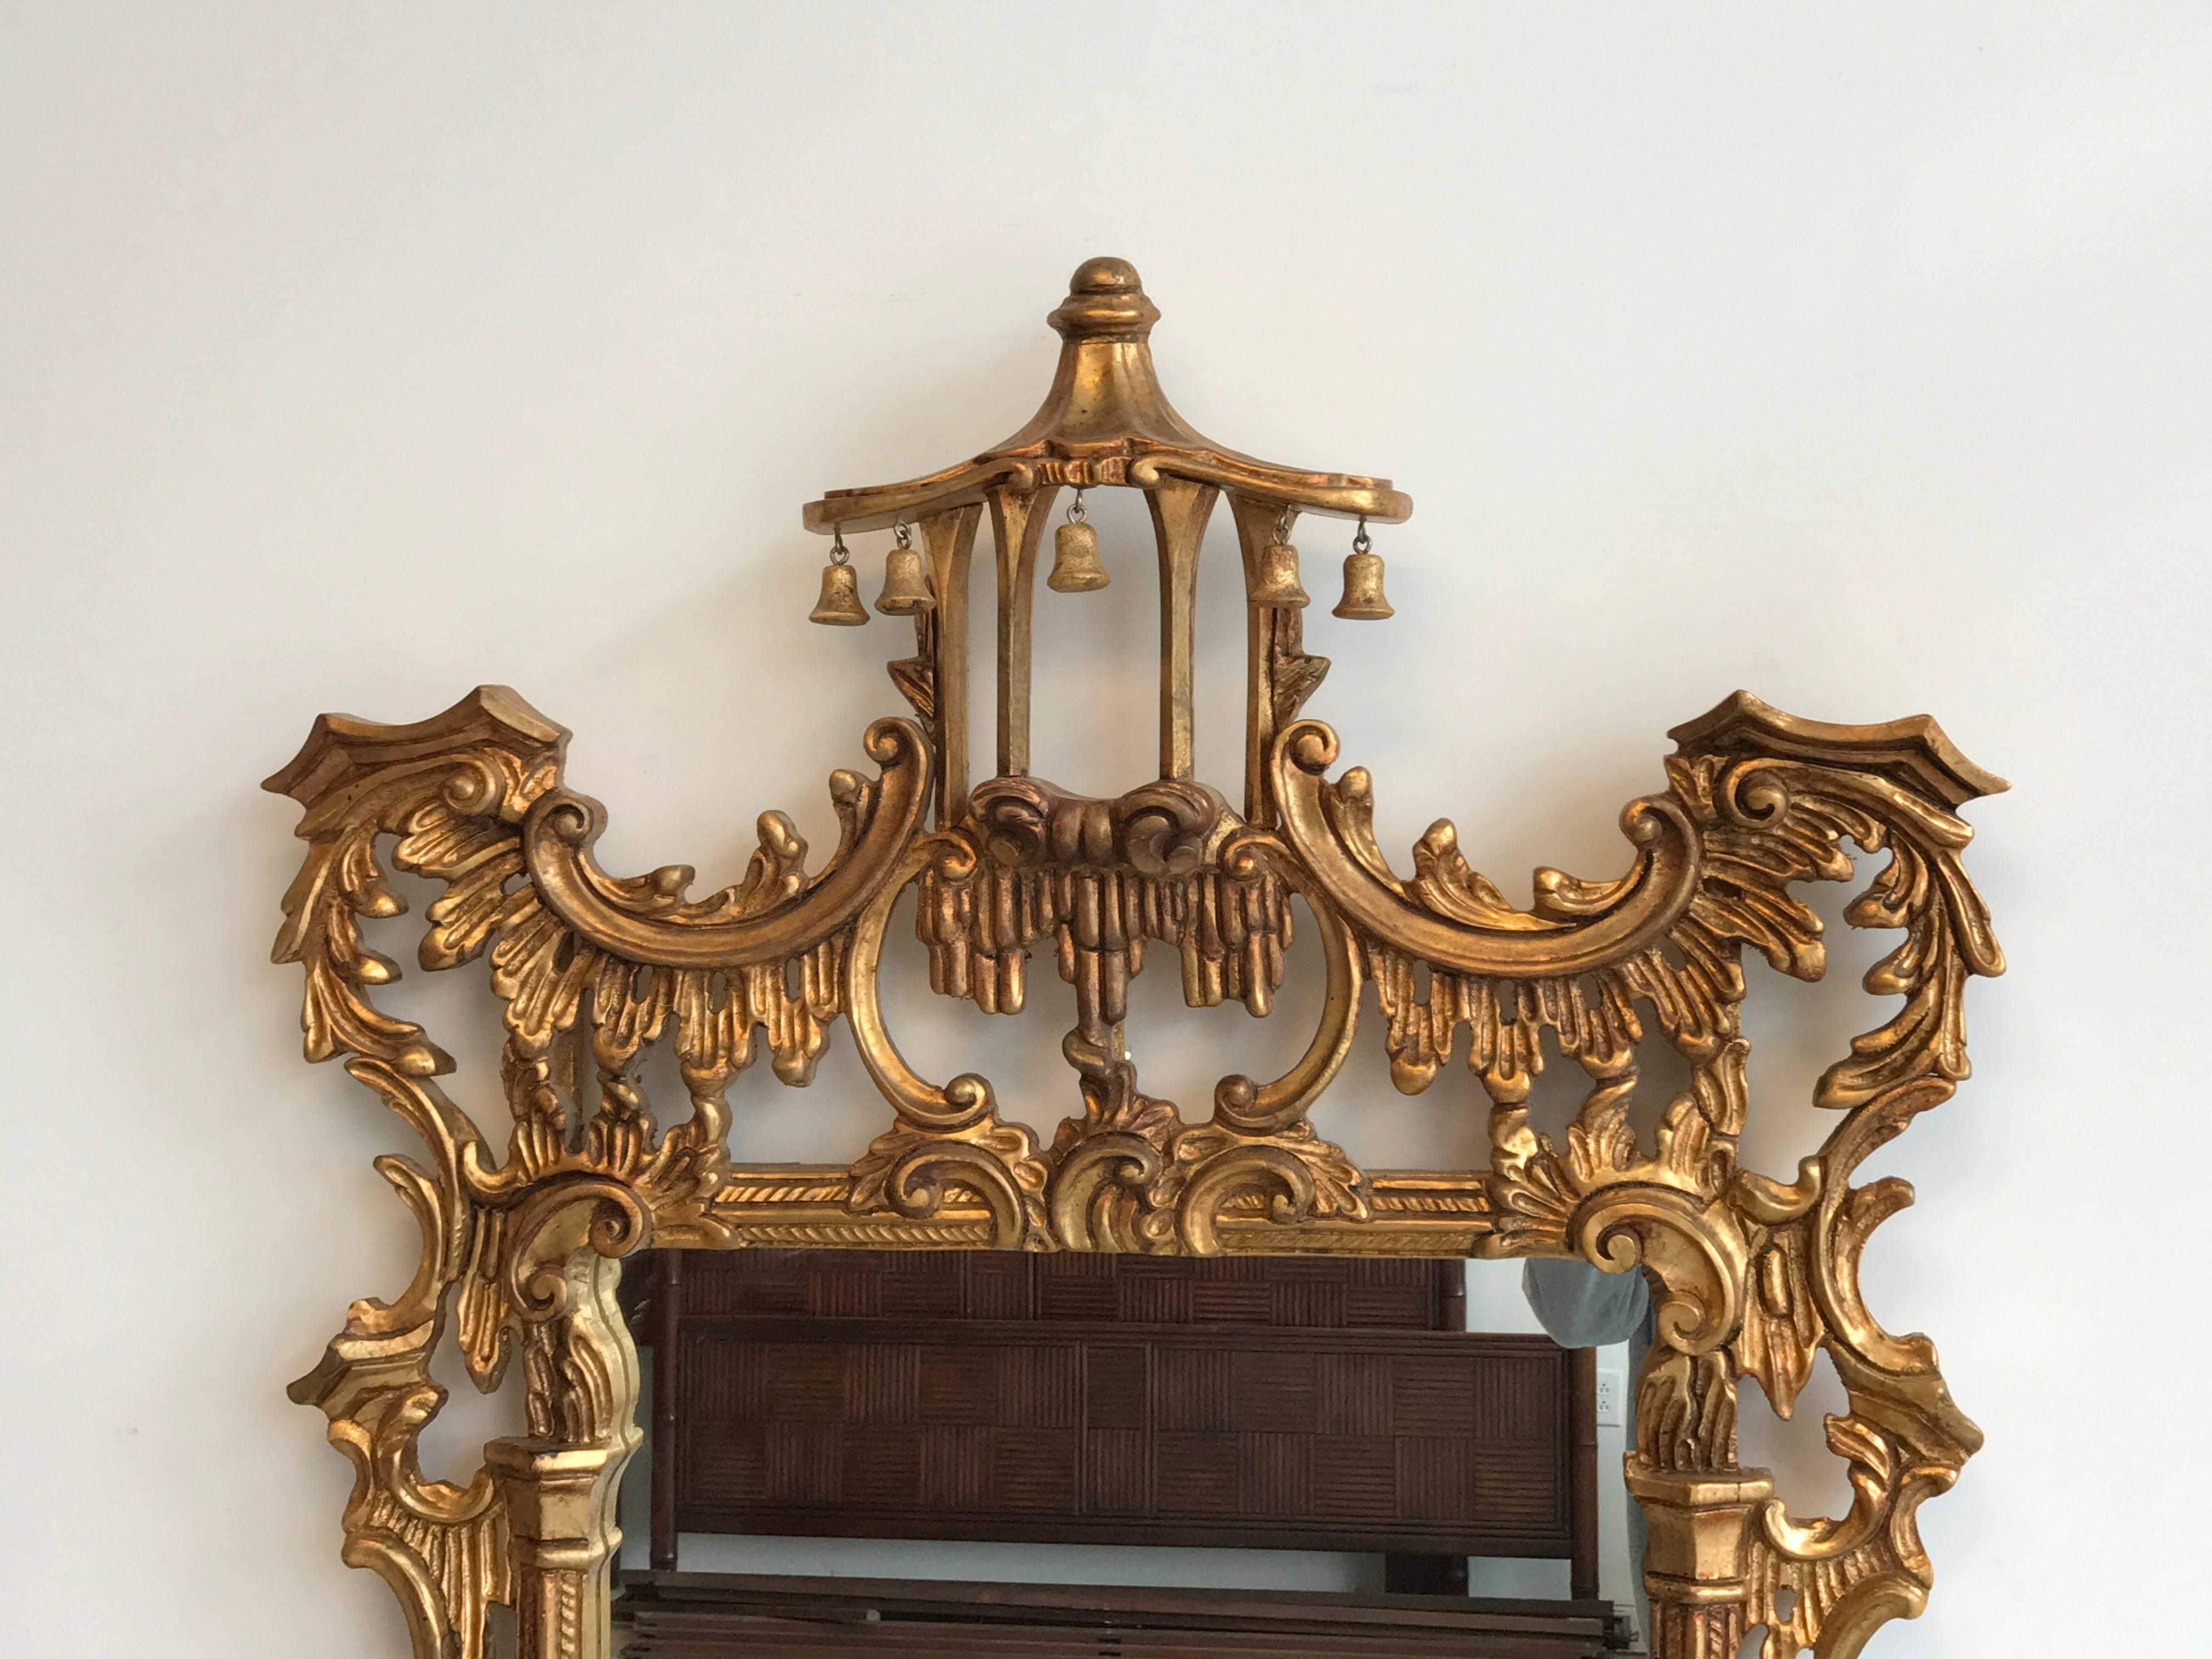 Offered is a gorgeous, substantial 1970s giltwood pagoda mirror. The piece has stunning detailing, with ornate crests and carvings. Solid wood.